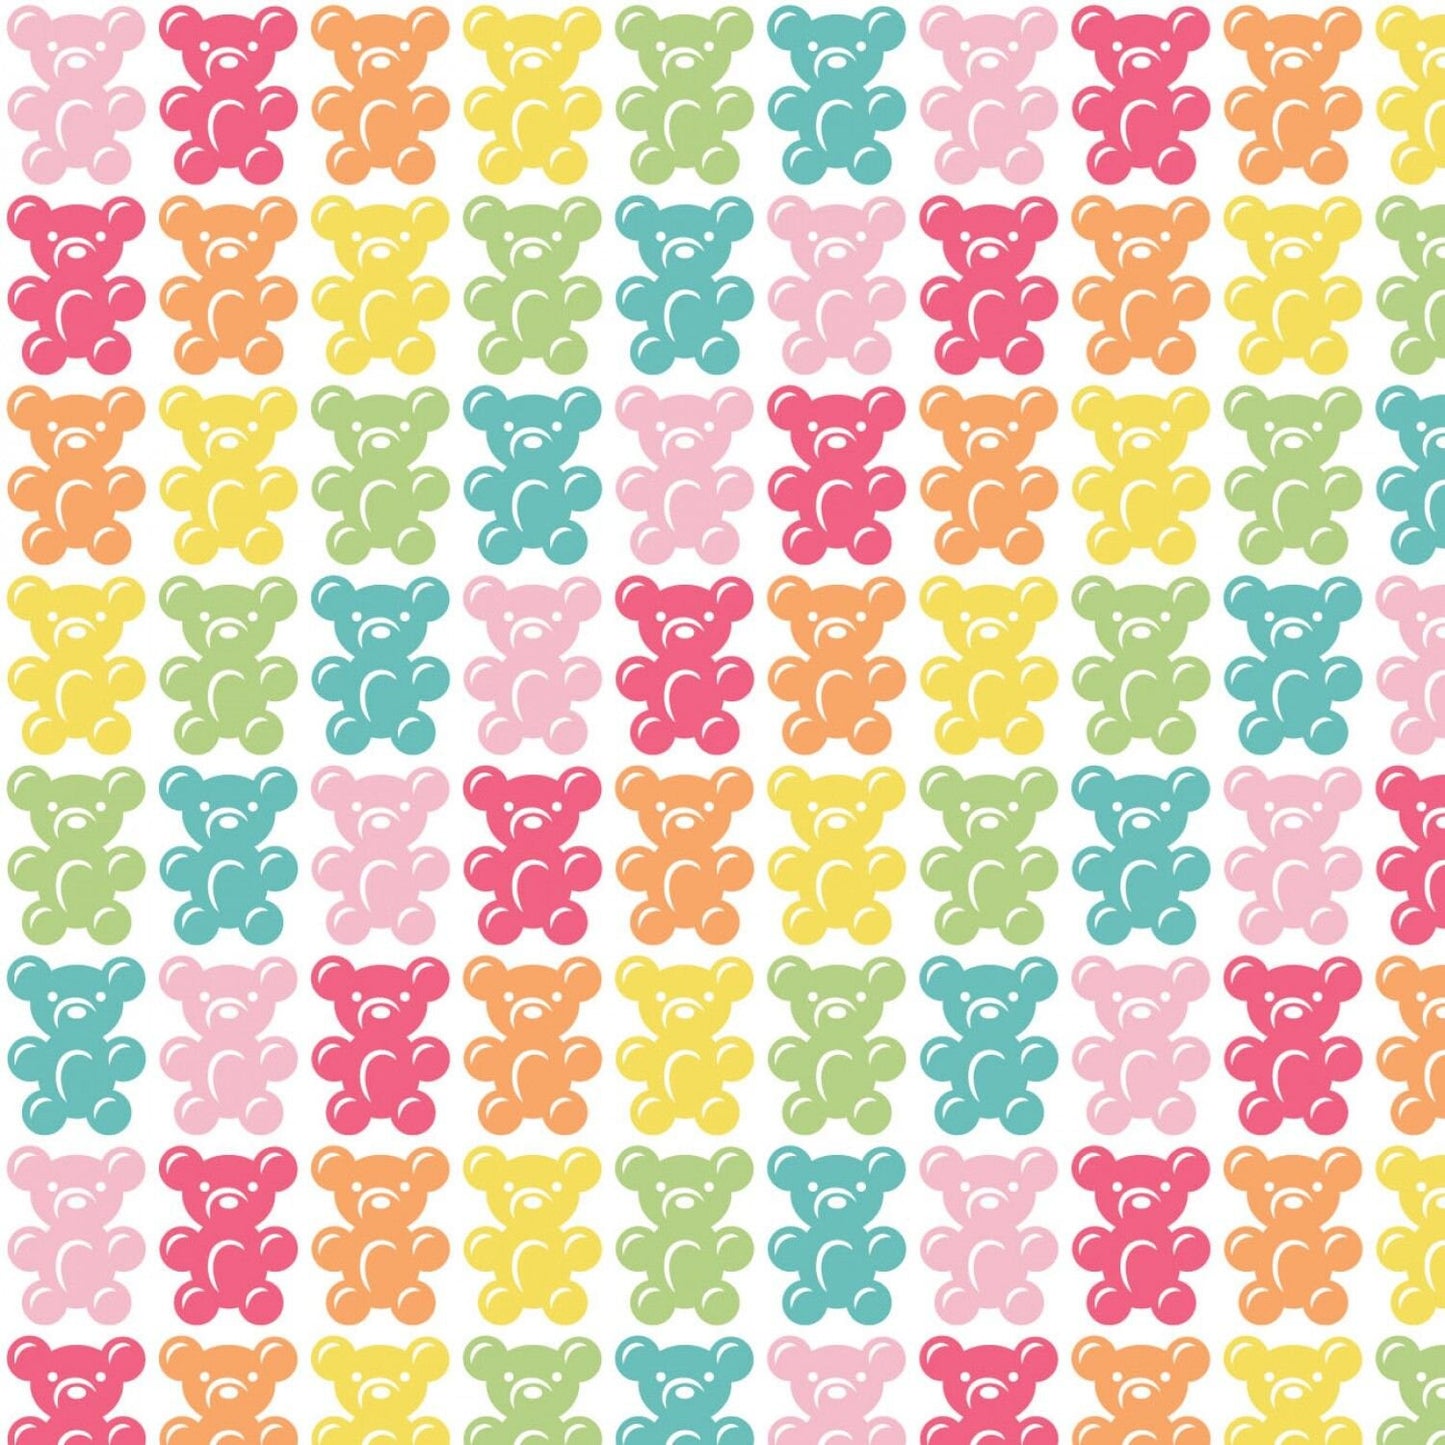 Be The Rainbow Gummy Bears Bright White  21200407-1 Cotton Woven Fabric